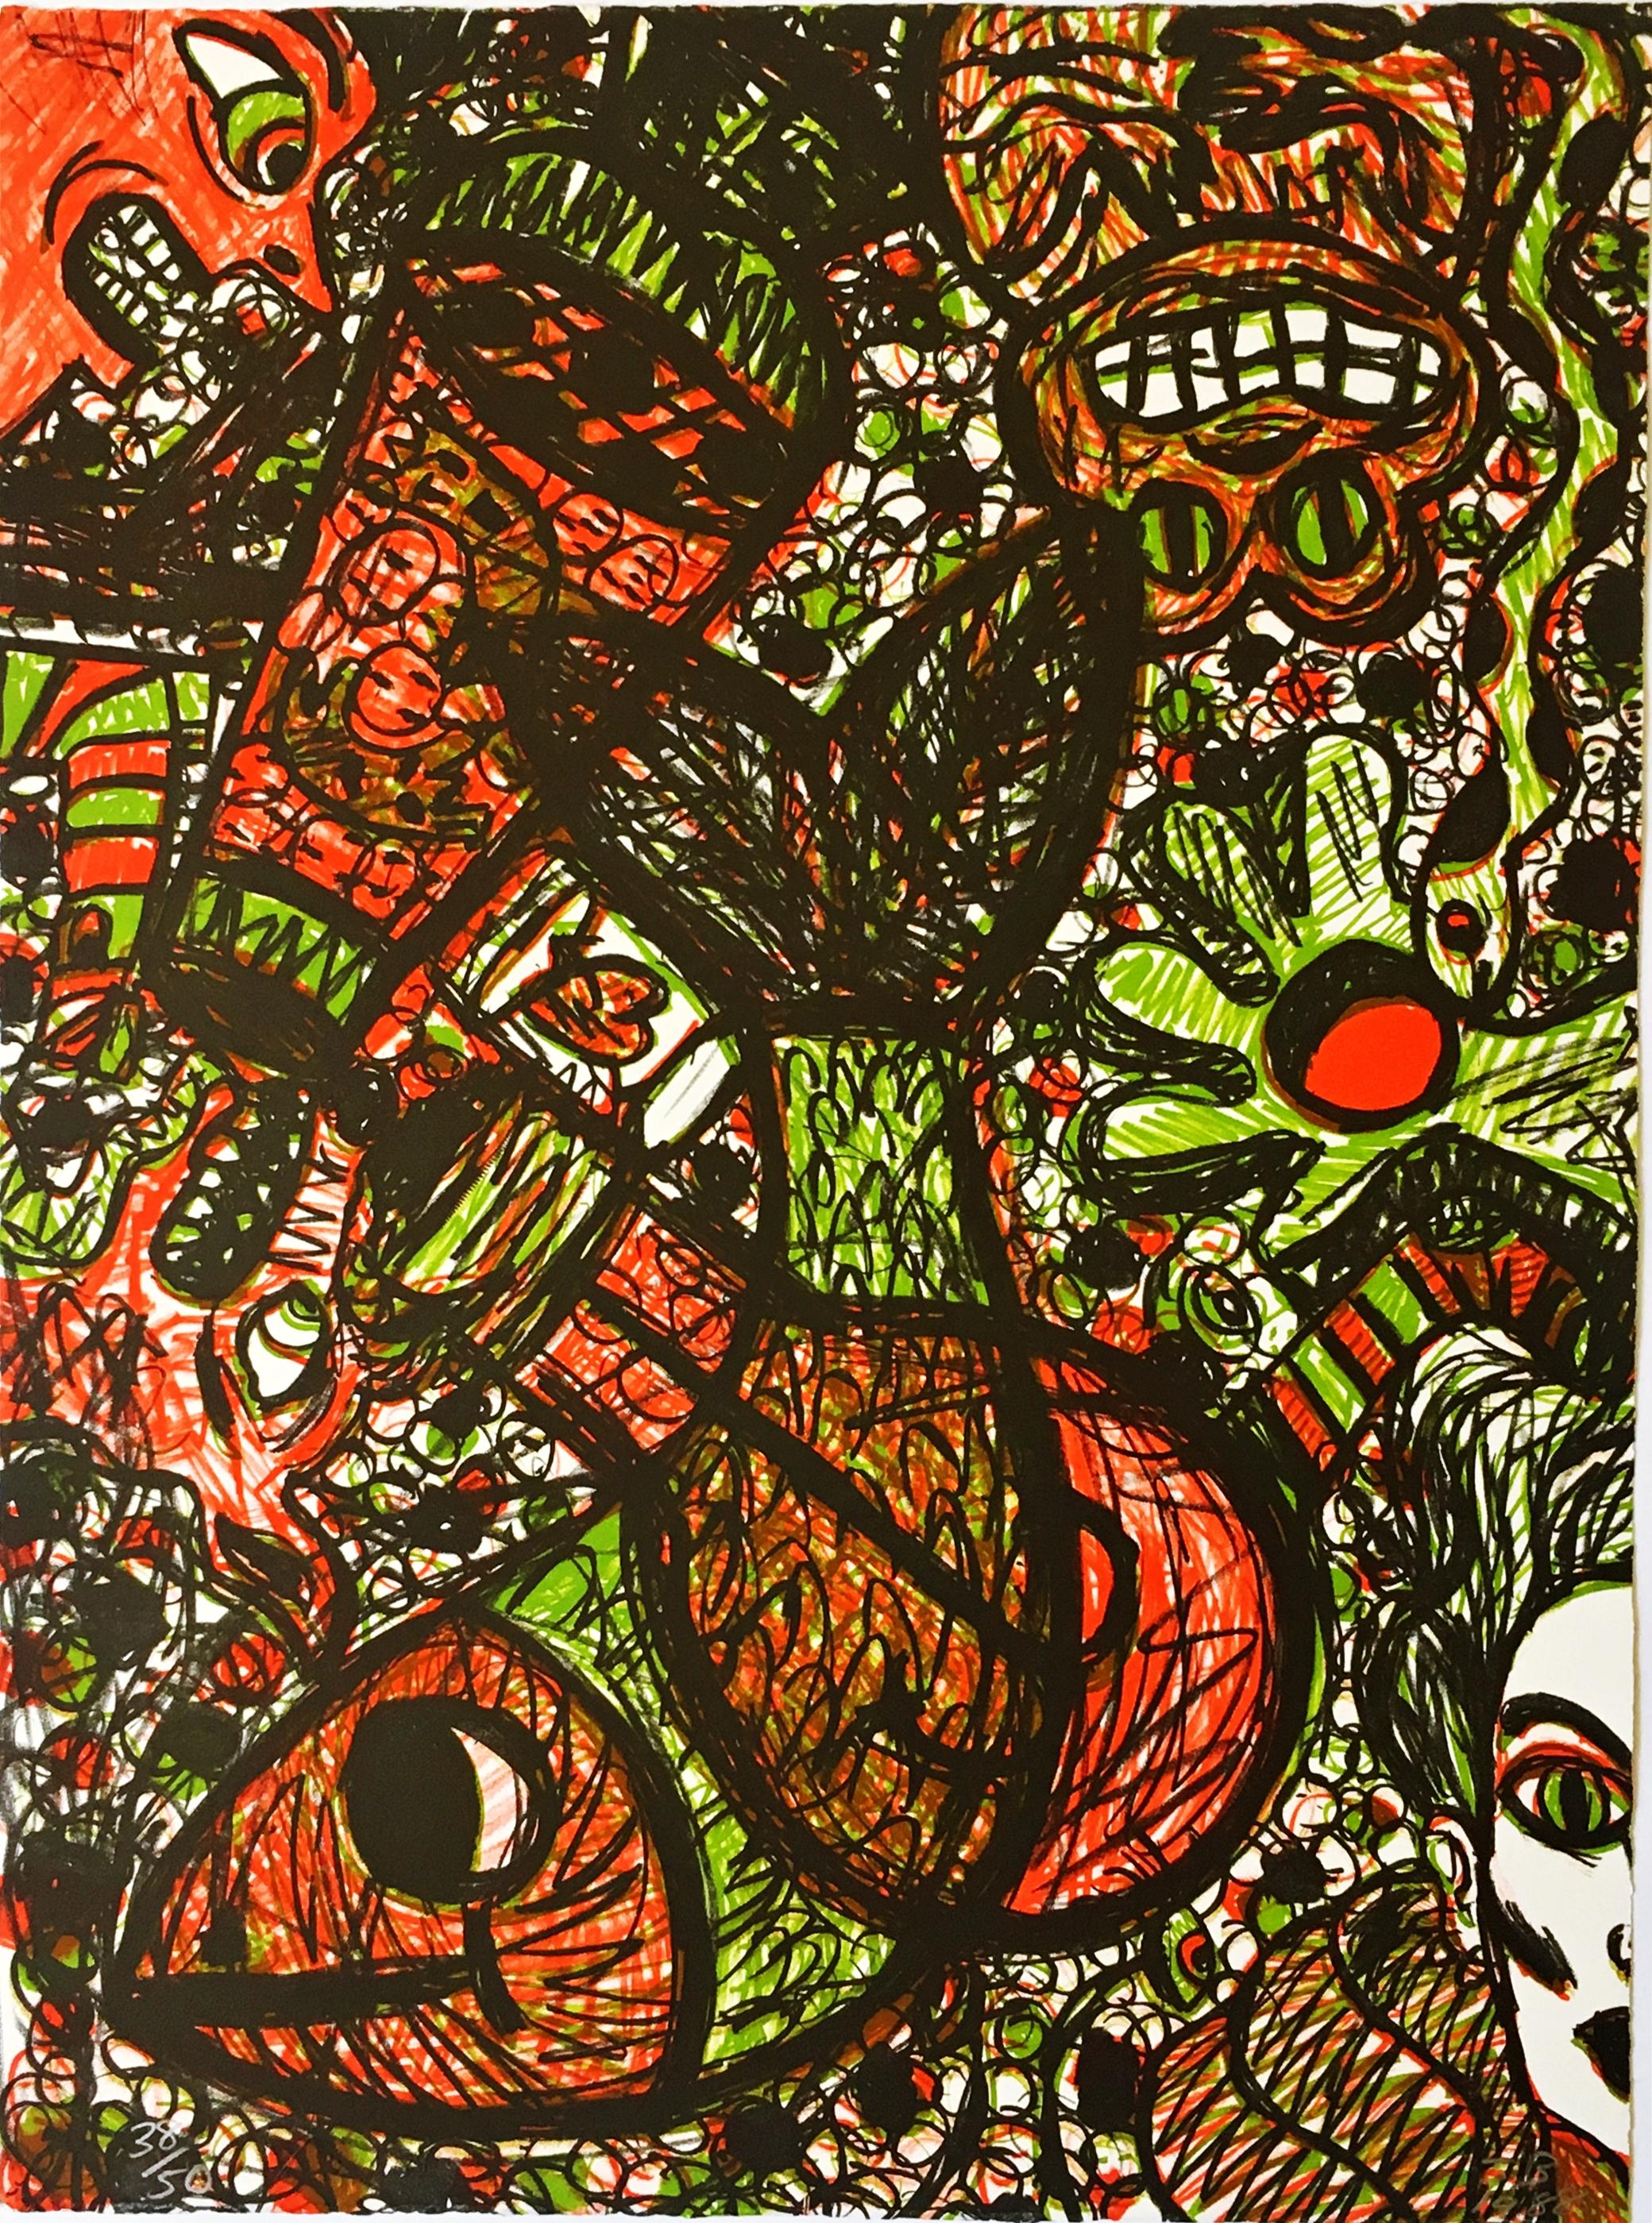 Untitled, expressionistic woodcut print, from the Art Against AIDS Portfolio